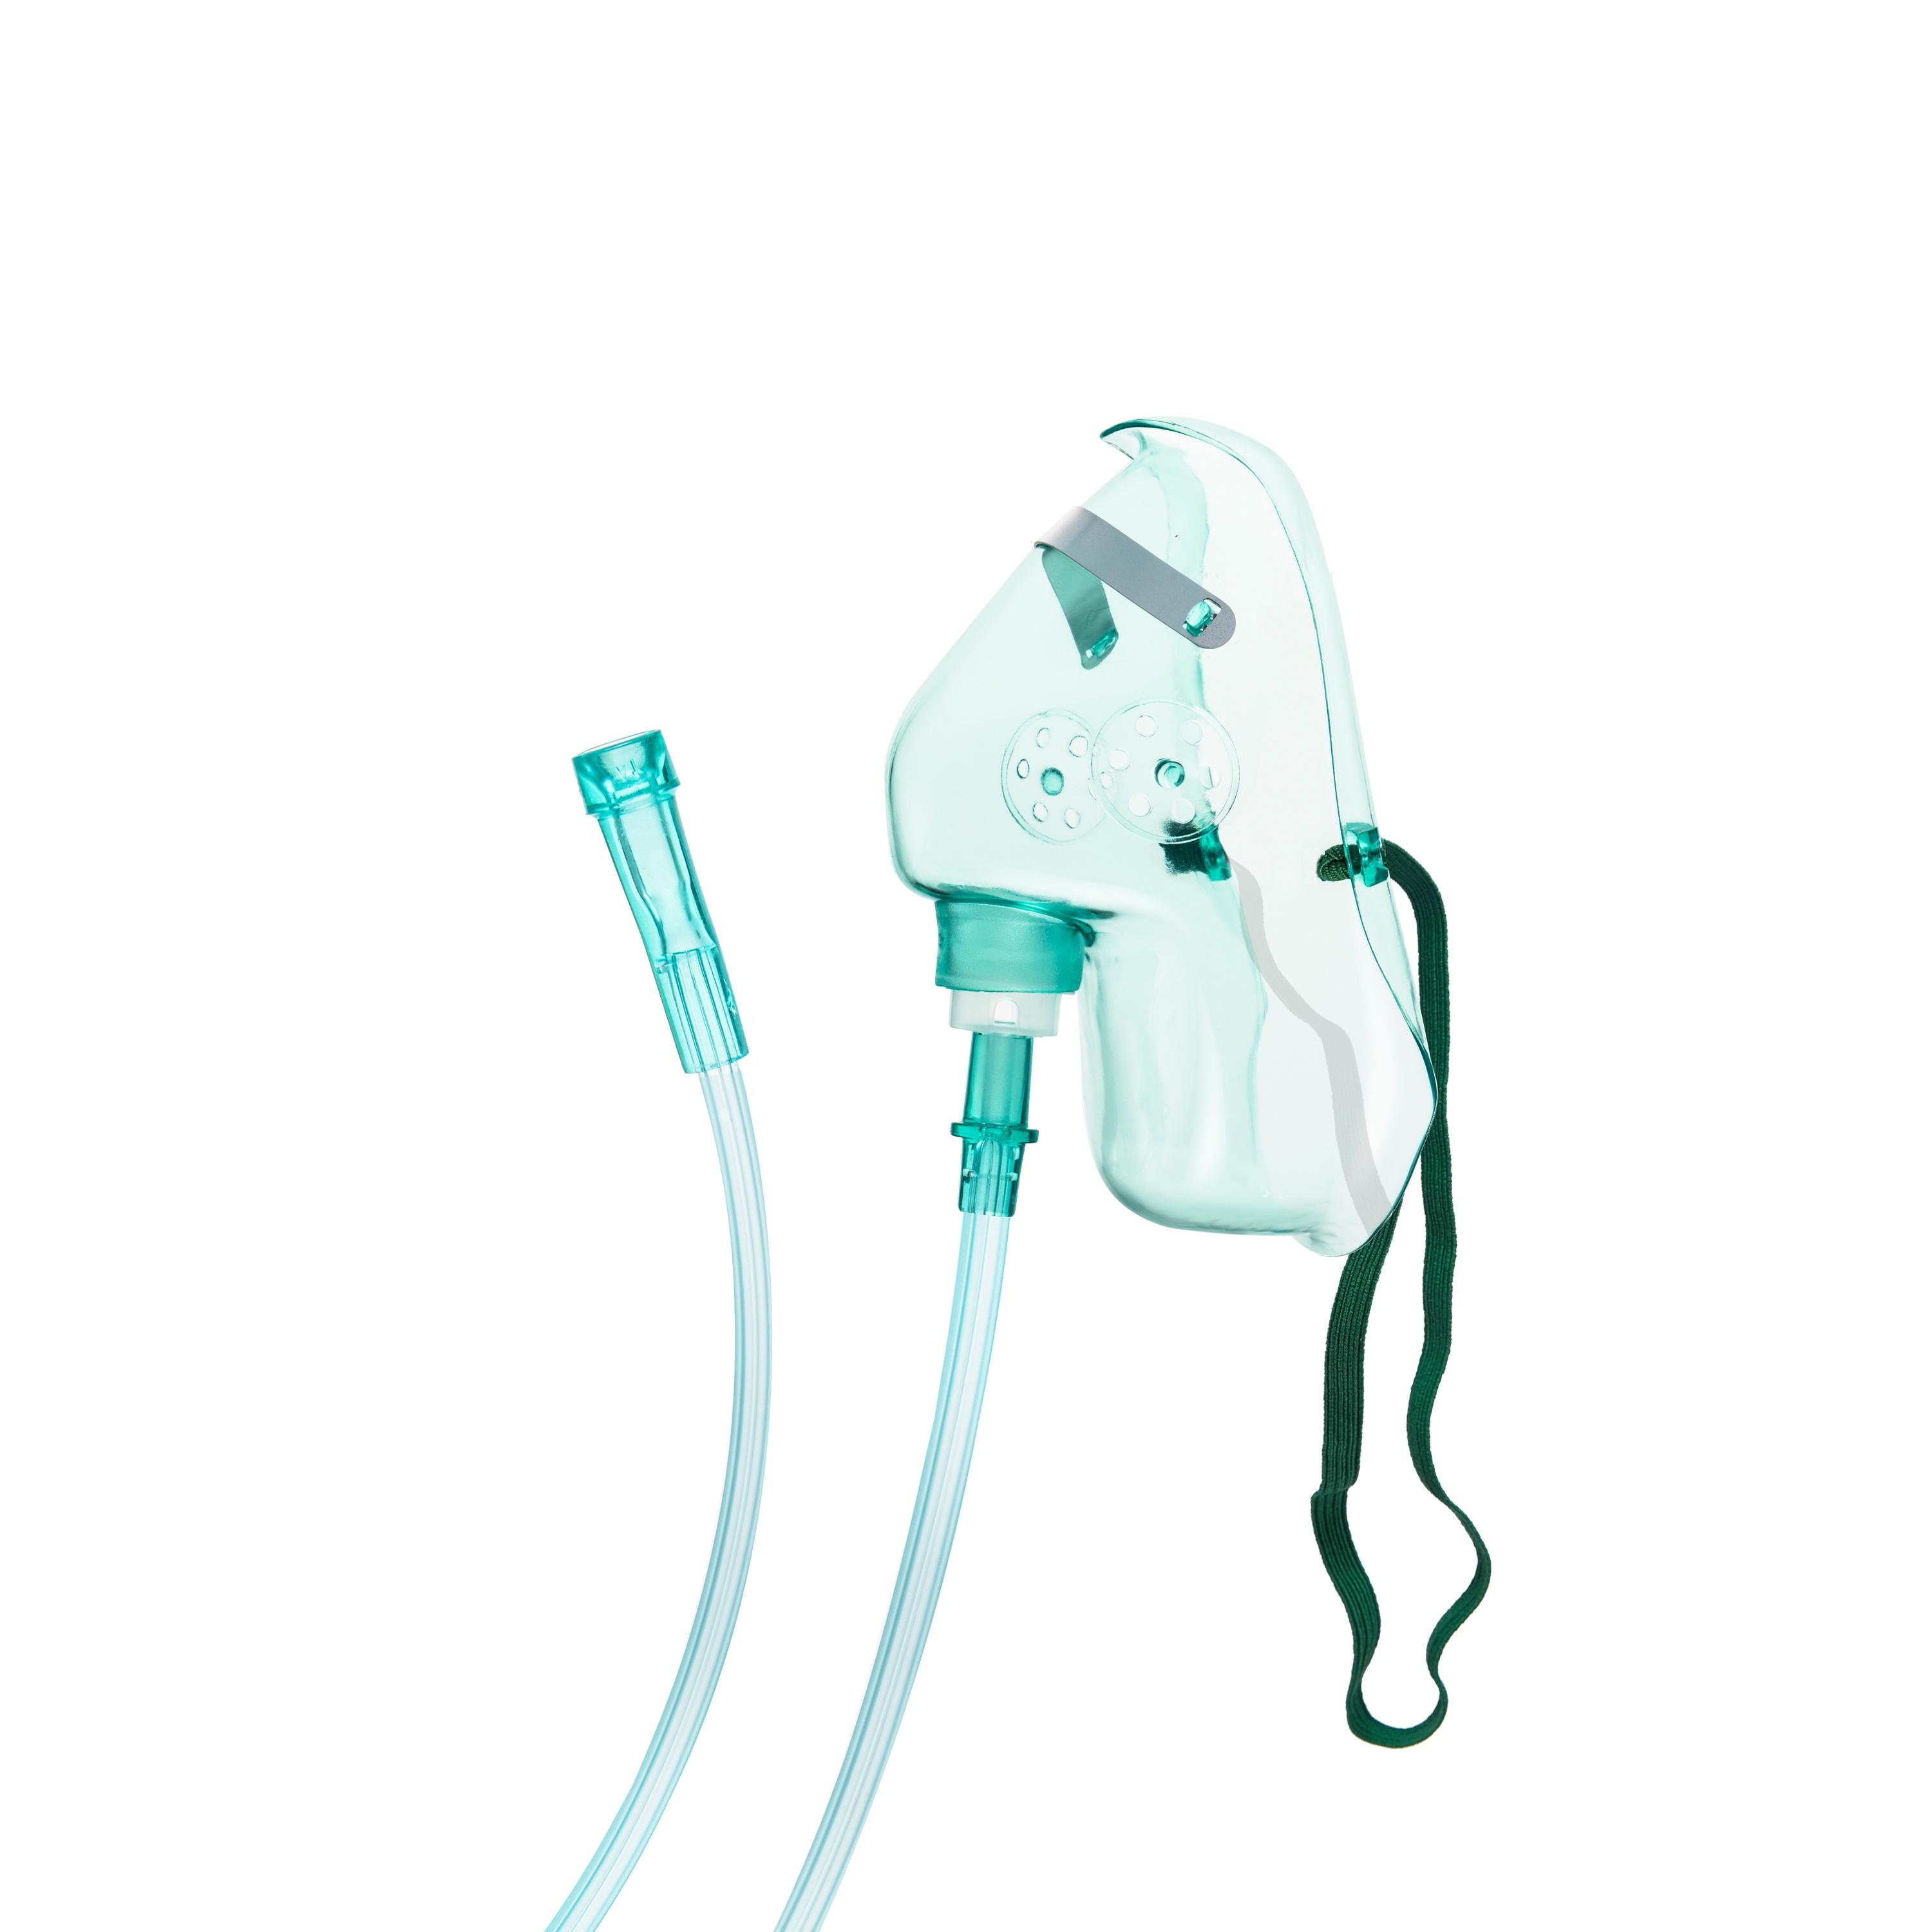 Disposable Vaccine Pump: Efficient and Cost Effective